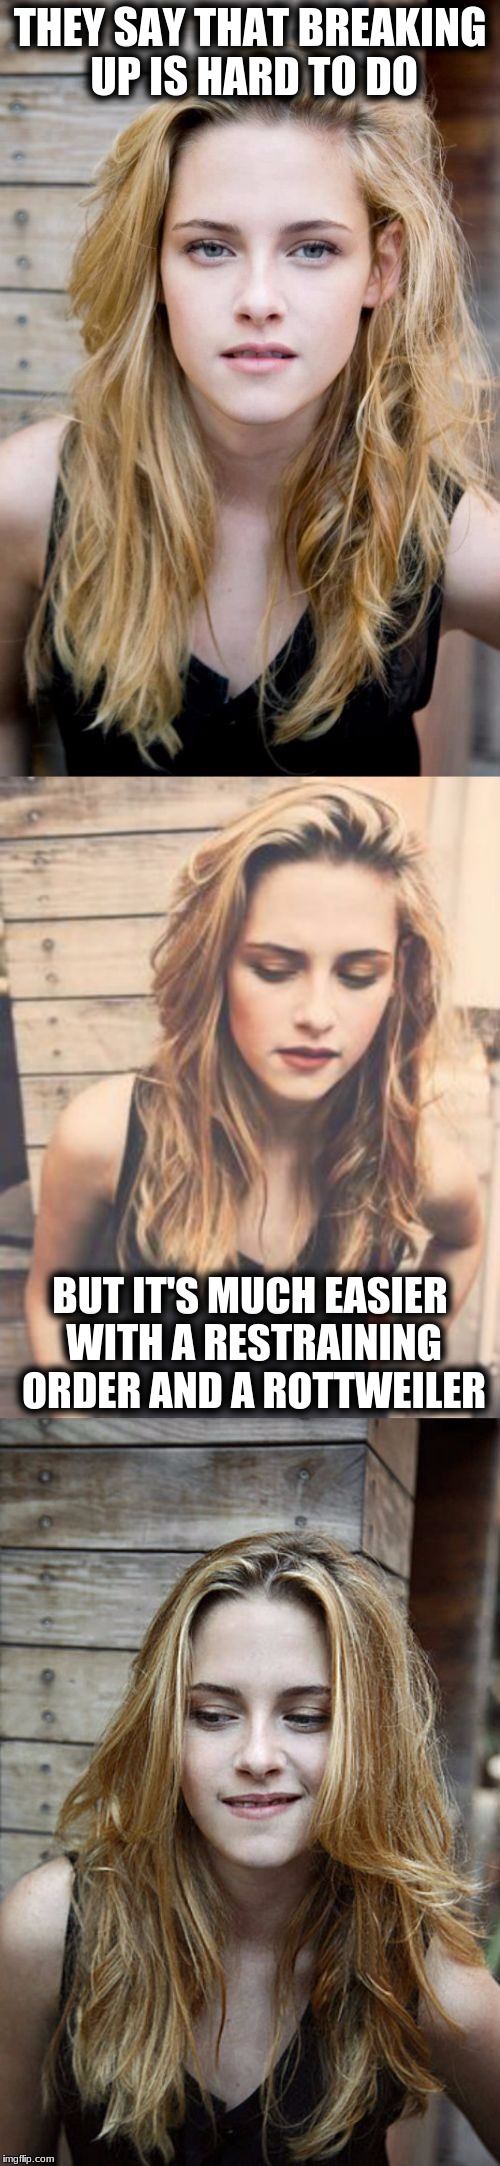 Bad Pun Kristen Stewart 2 | THEY SAY THAT BREAKING UP IS HARD TO DO; BUT IT'S MUCH EASIER WITH A RESTRAINING ORDER AND A ROTTWEILER | image tagged in bad pun kristen stewart 2 | made w/ Imgflip meme maker